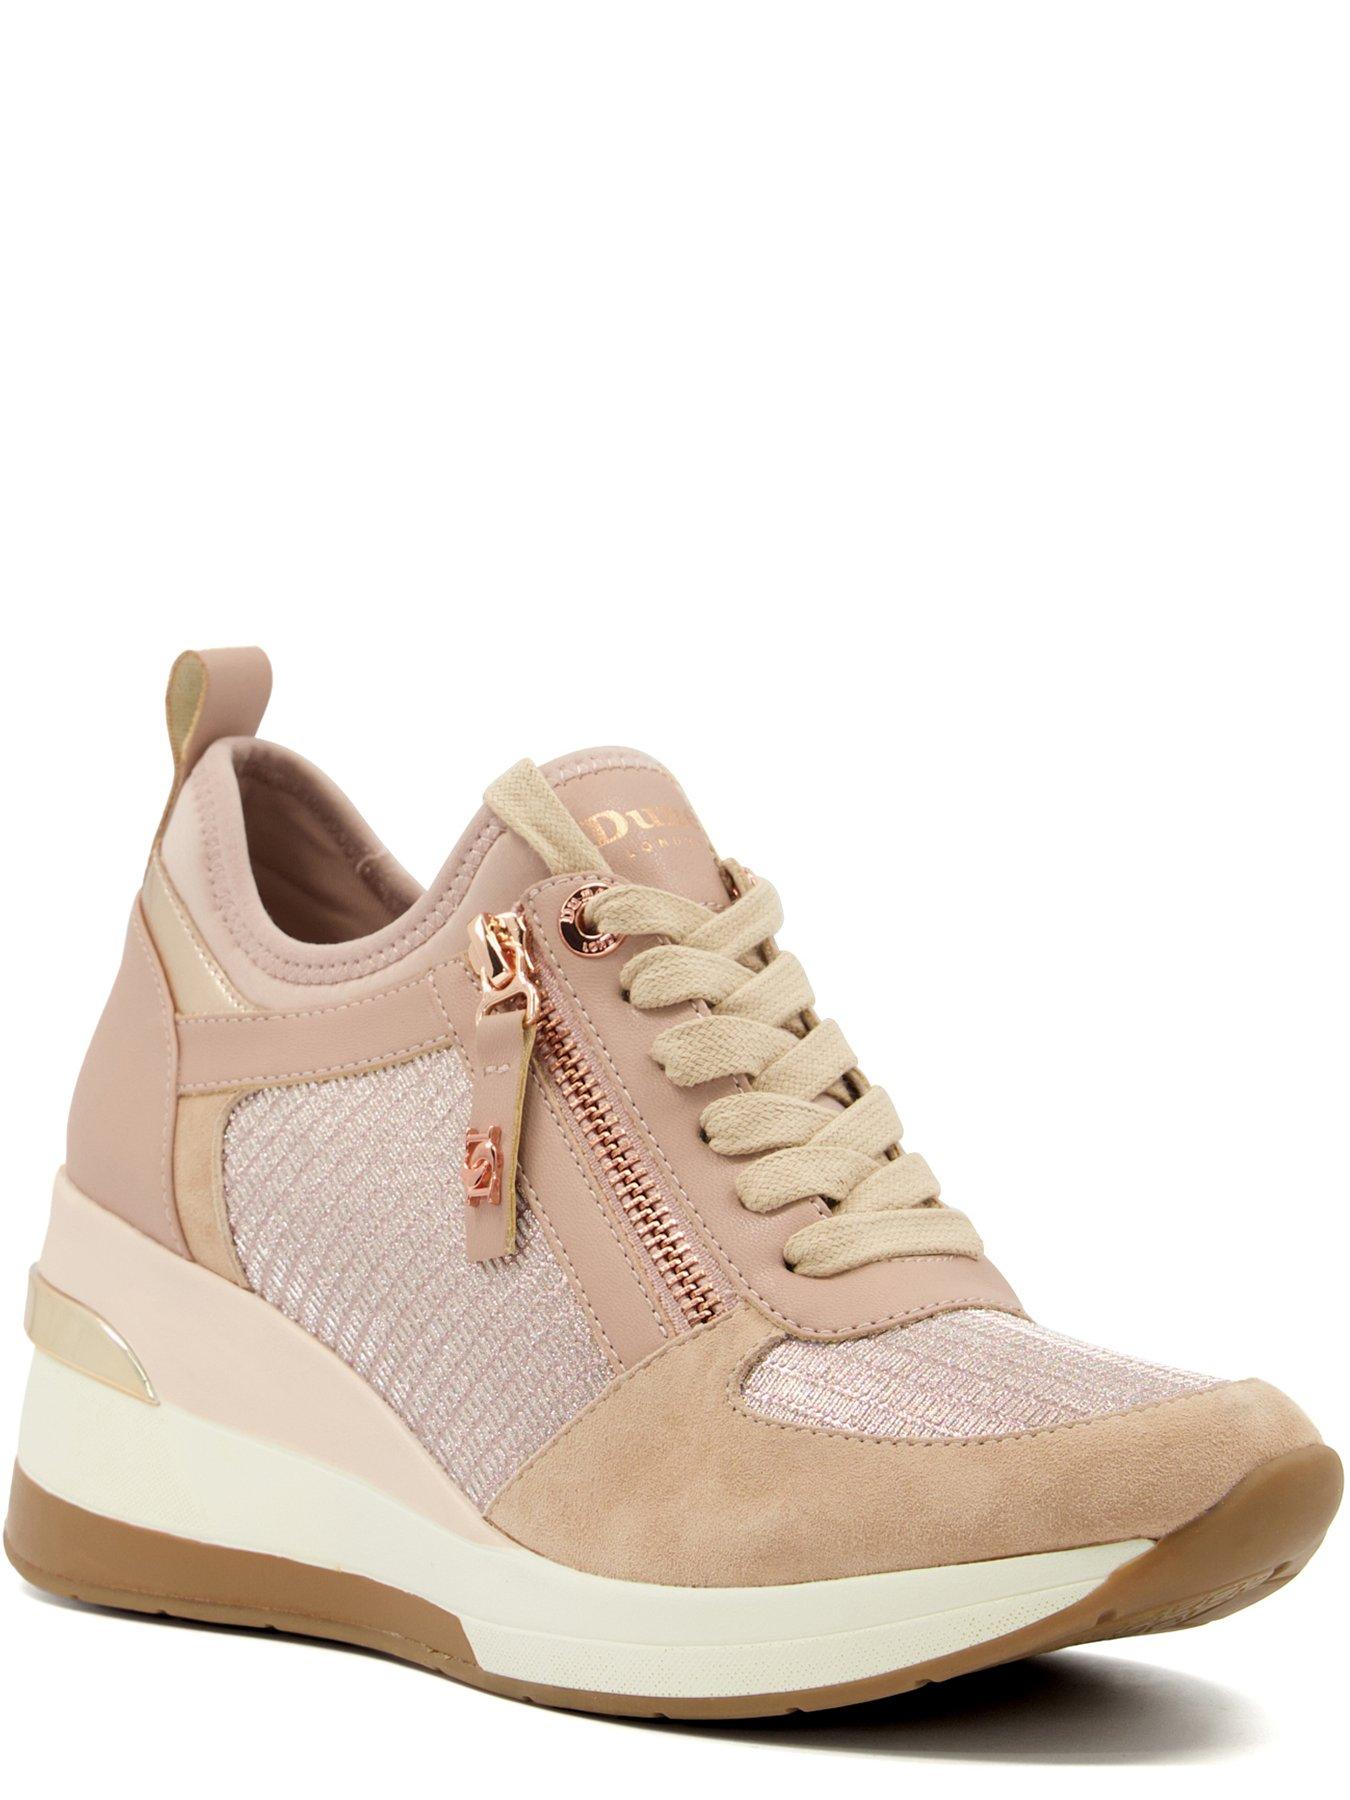 Dune London Eilin Rose Gold Wedge Lace-up Trainers | very.co.uk